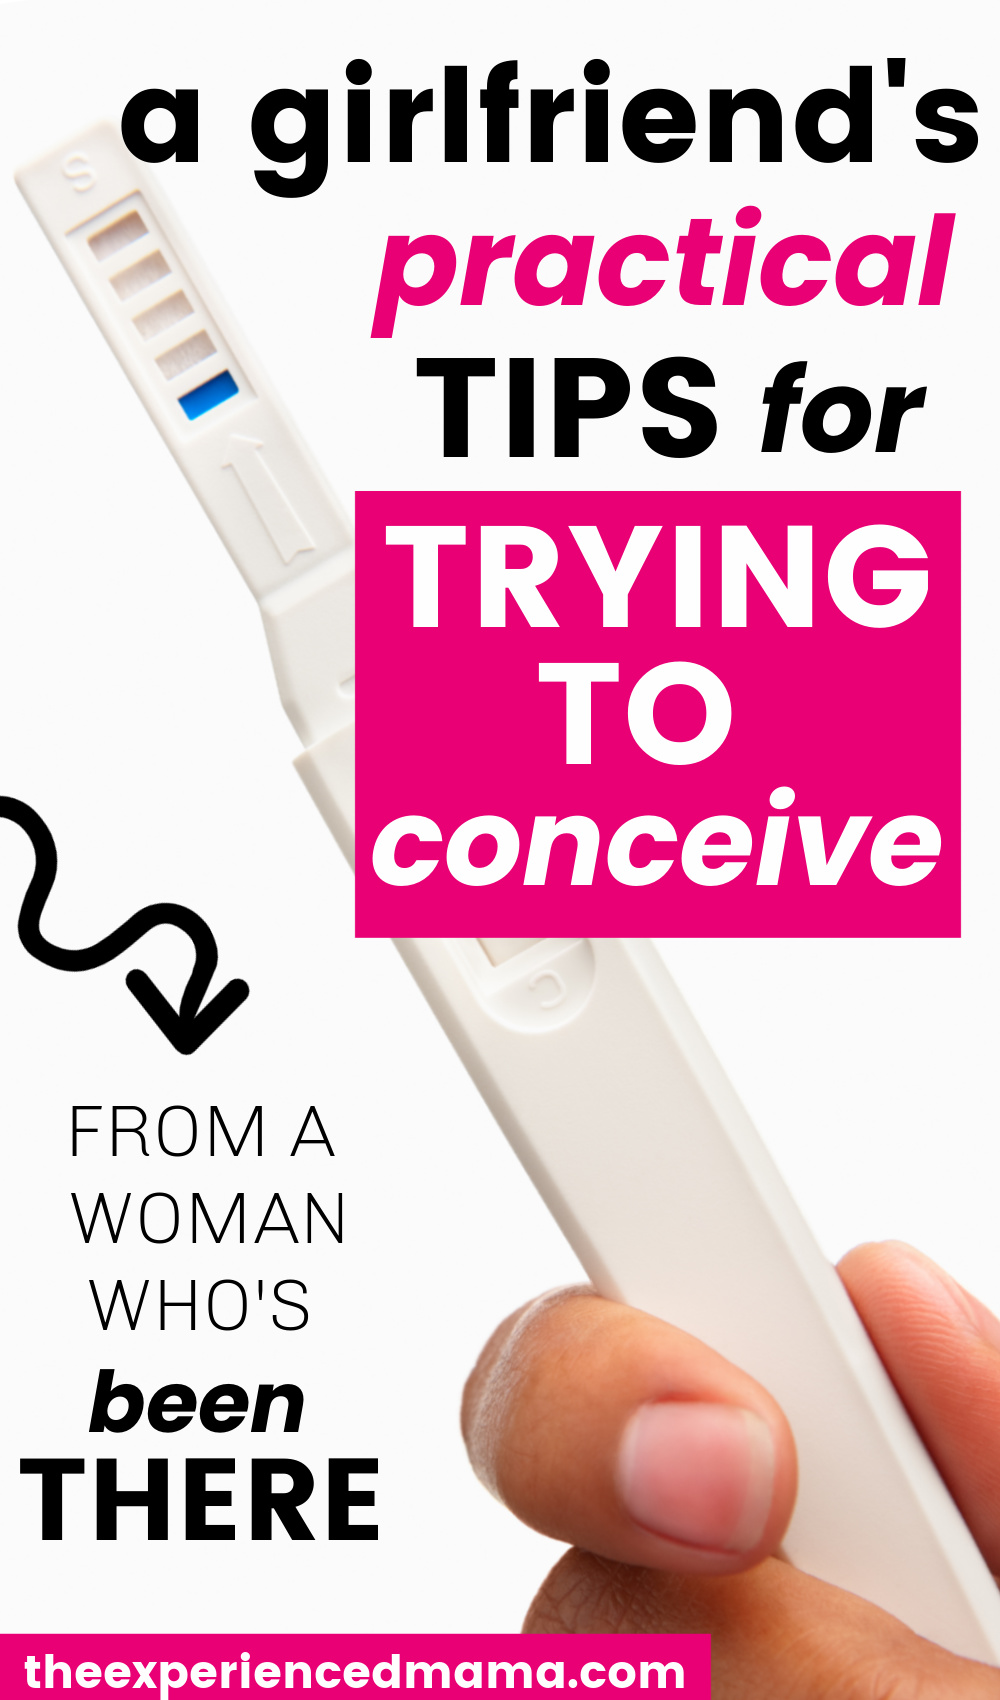 pregnancy test with text overlay, "a girlfriend's practical tips for trying to conceive"